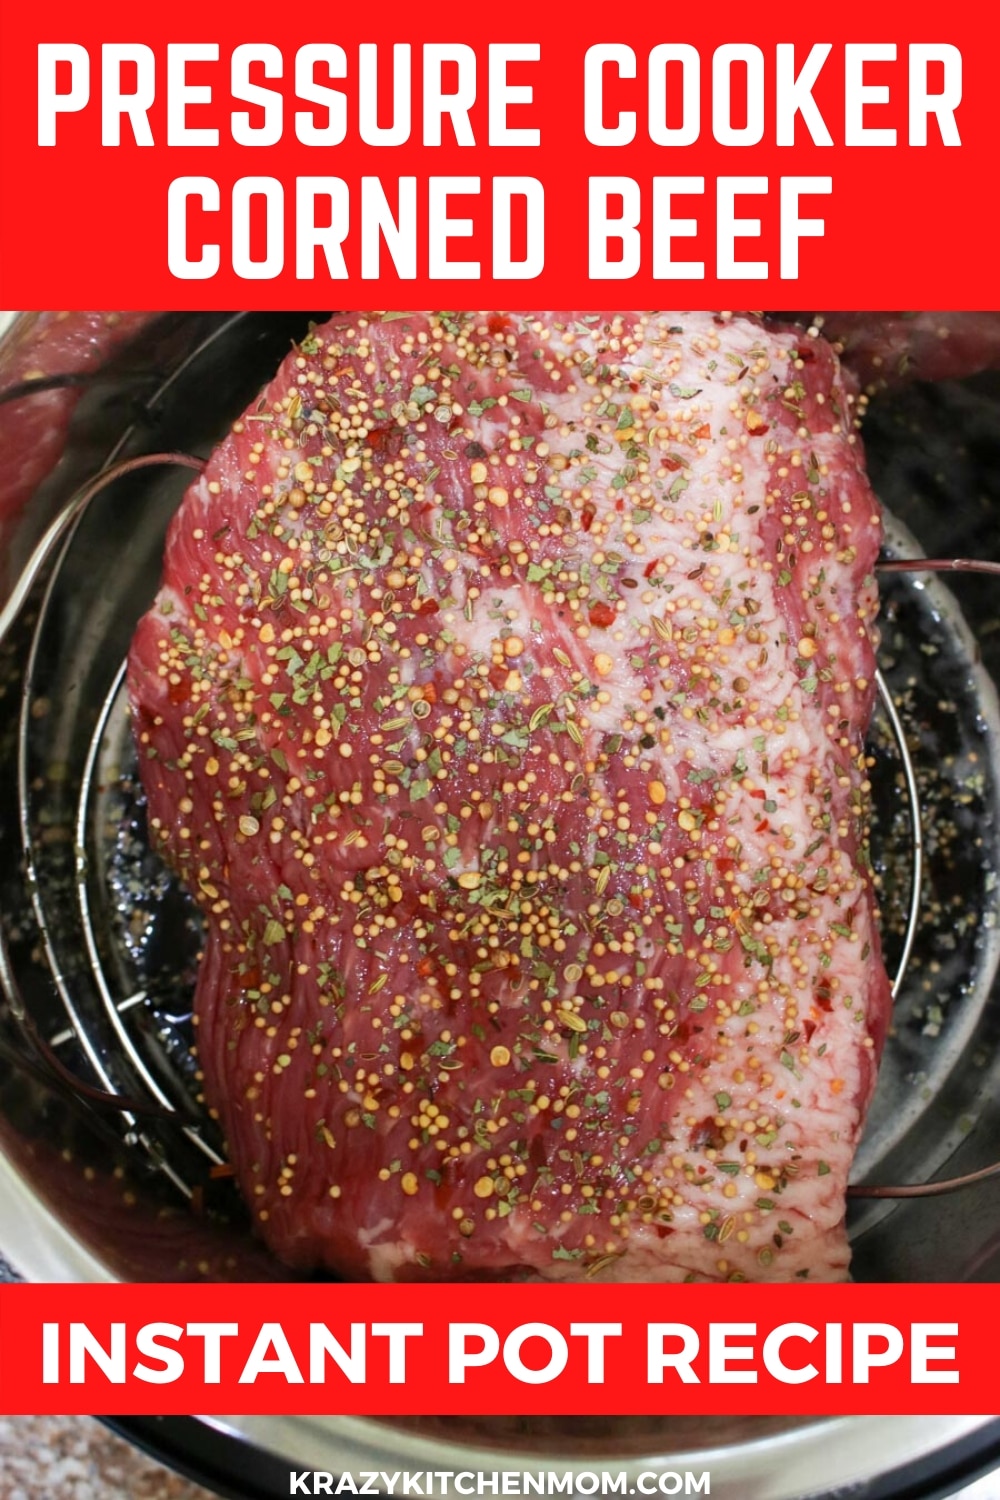 Three Ingredient Instant Pot Pressure Cooker Corned Beef Brisket turns out moist, tender and delicious in just 90 minutes.  via @krazykitchenmom